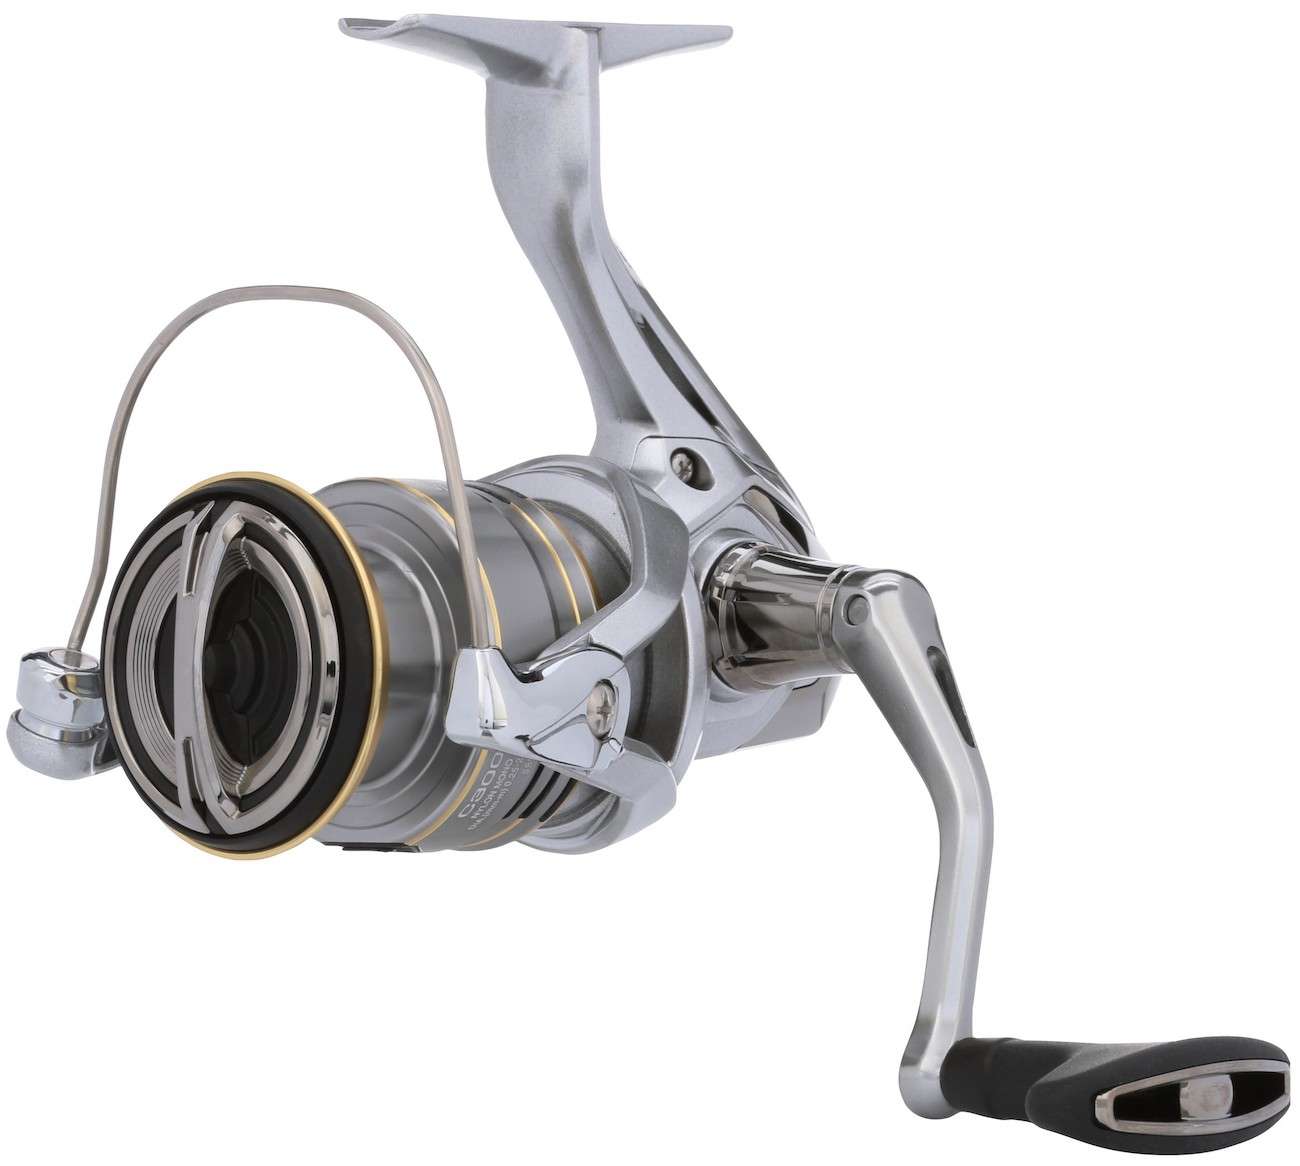 Is The Shimano Sedona Worth The Money? ~Honest Review~ 